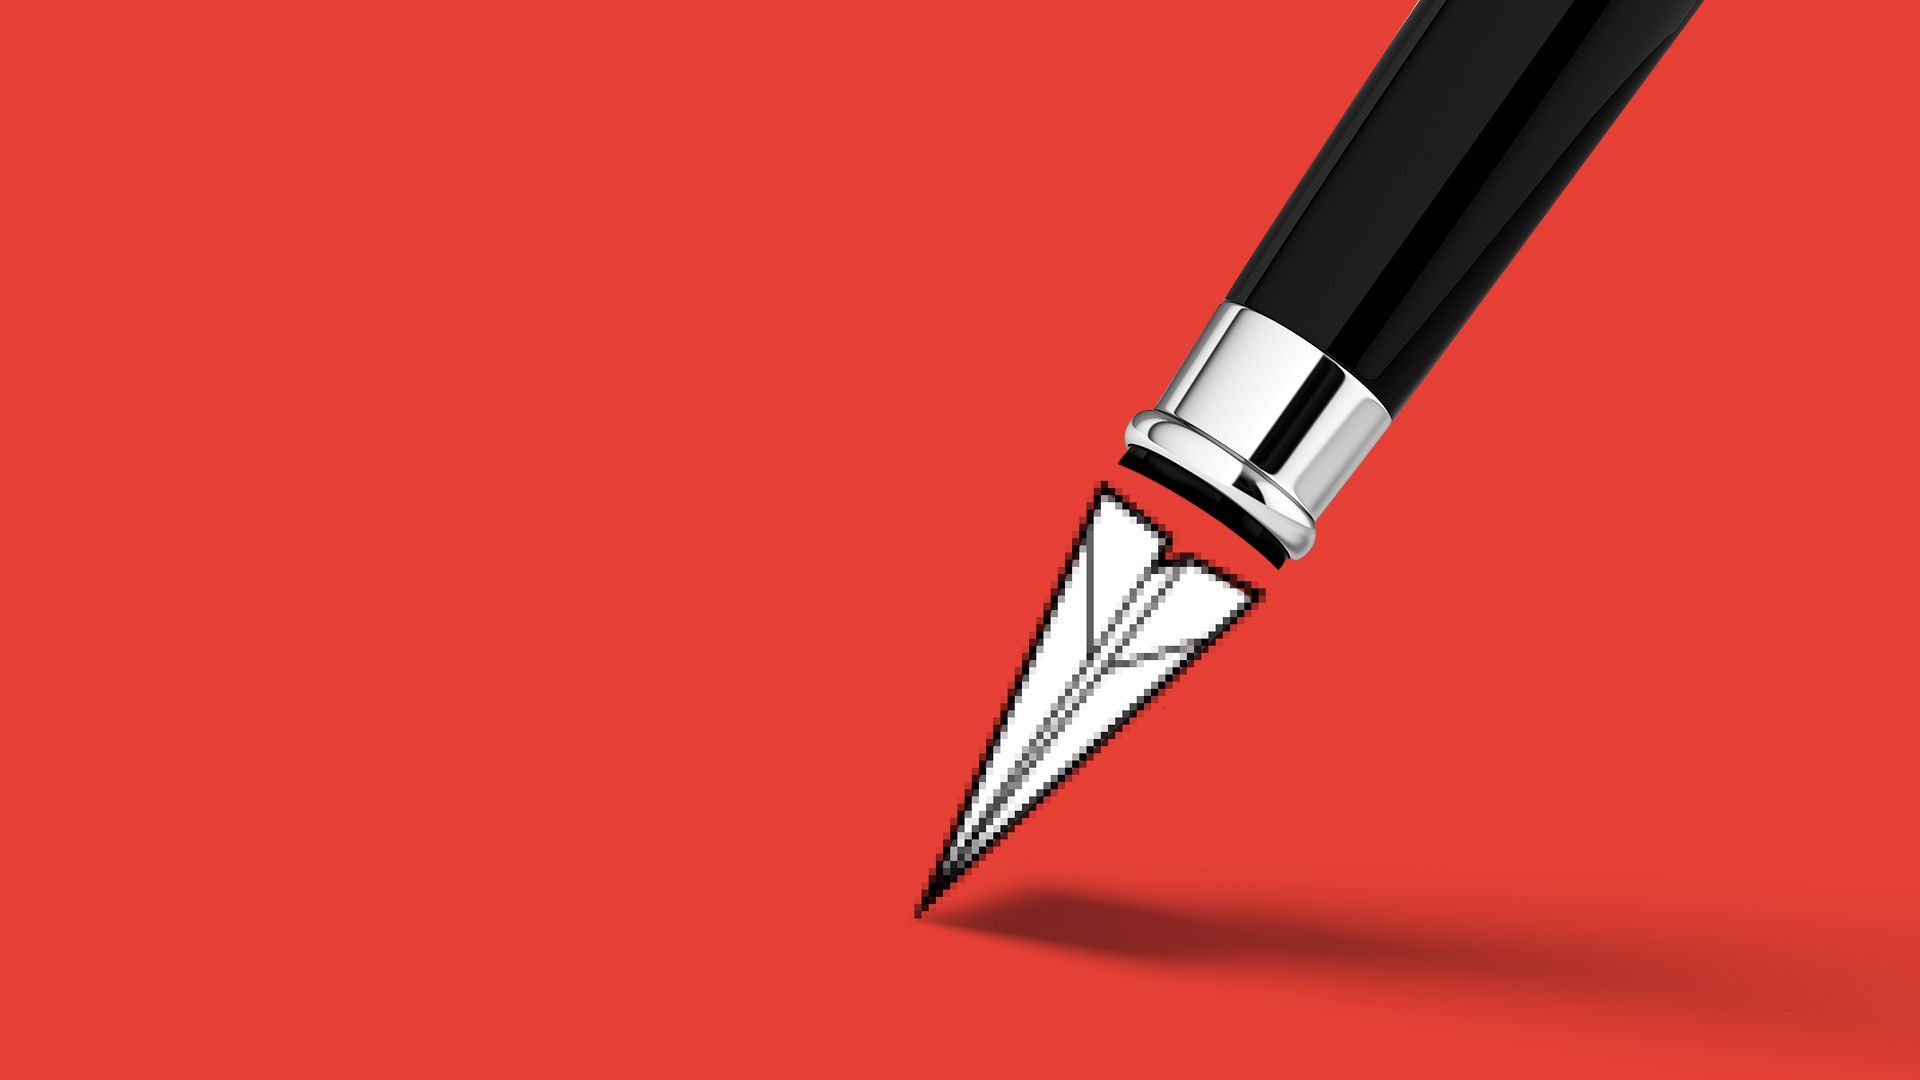 Illustration of a fountain pen with a pixelated paper airplane as the nib